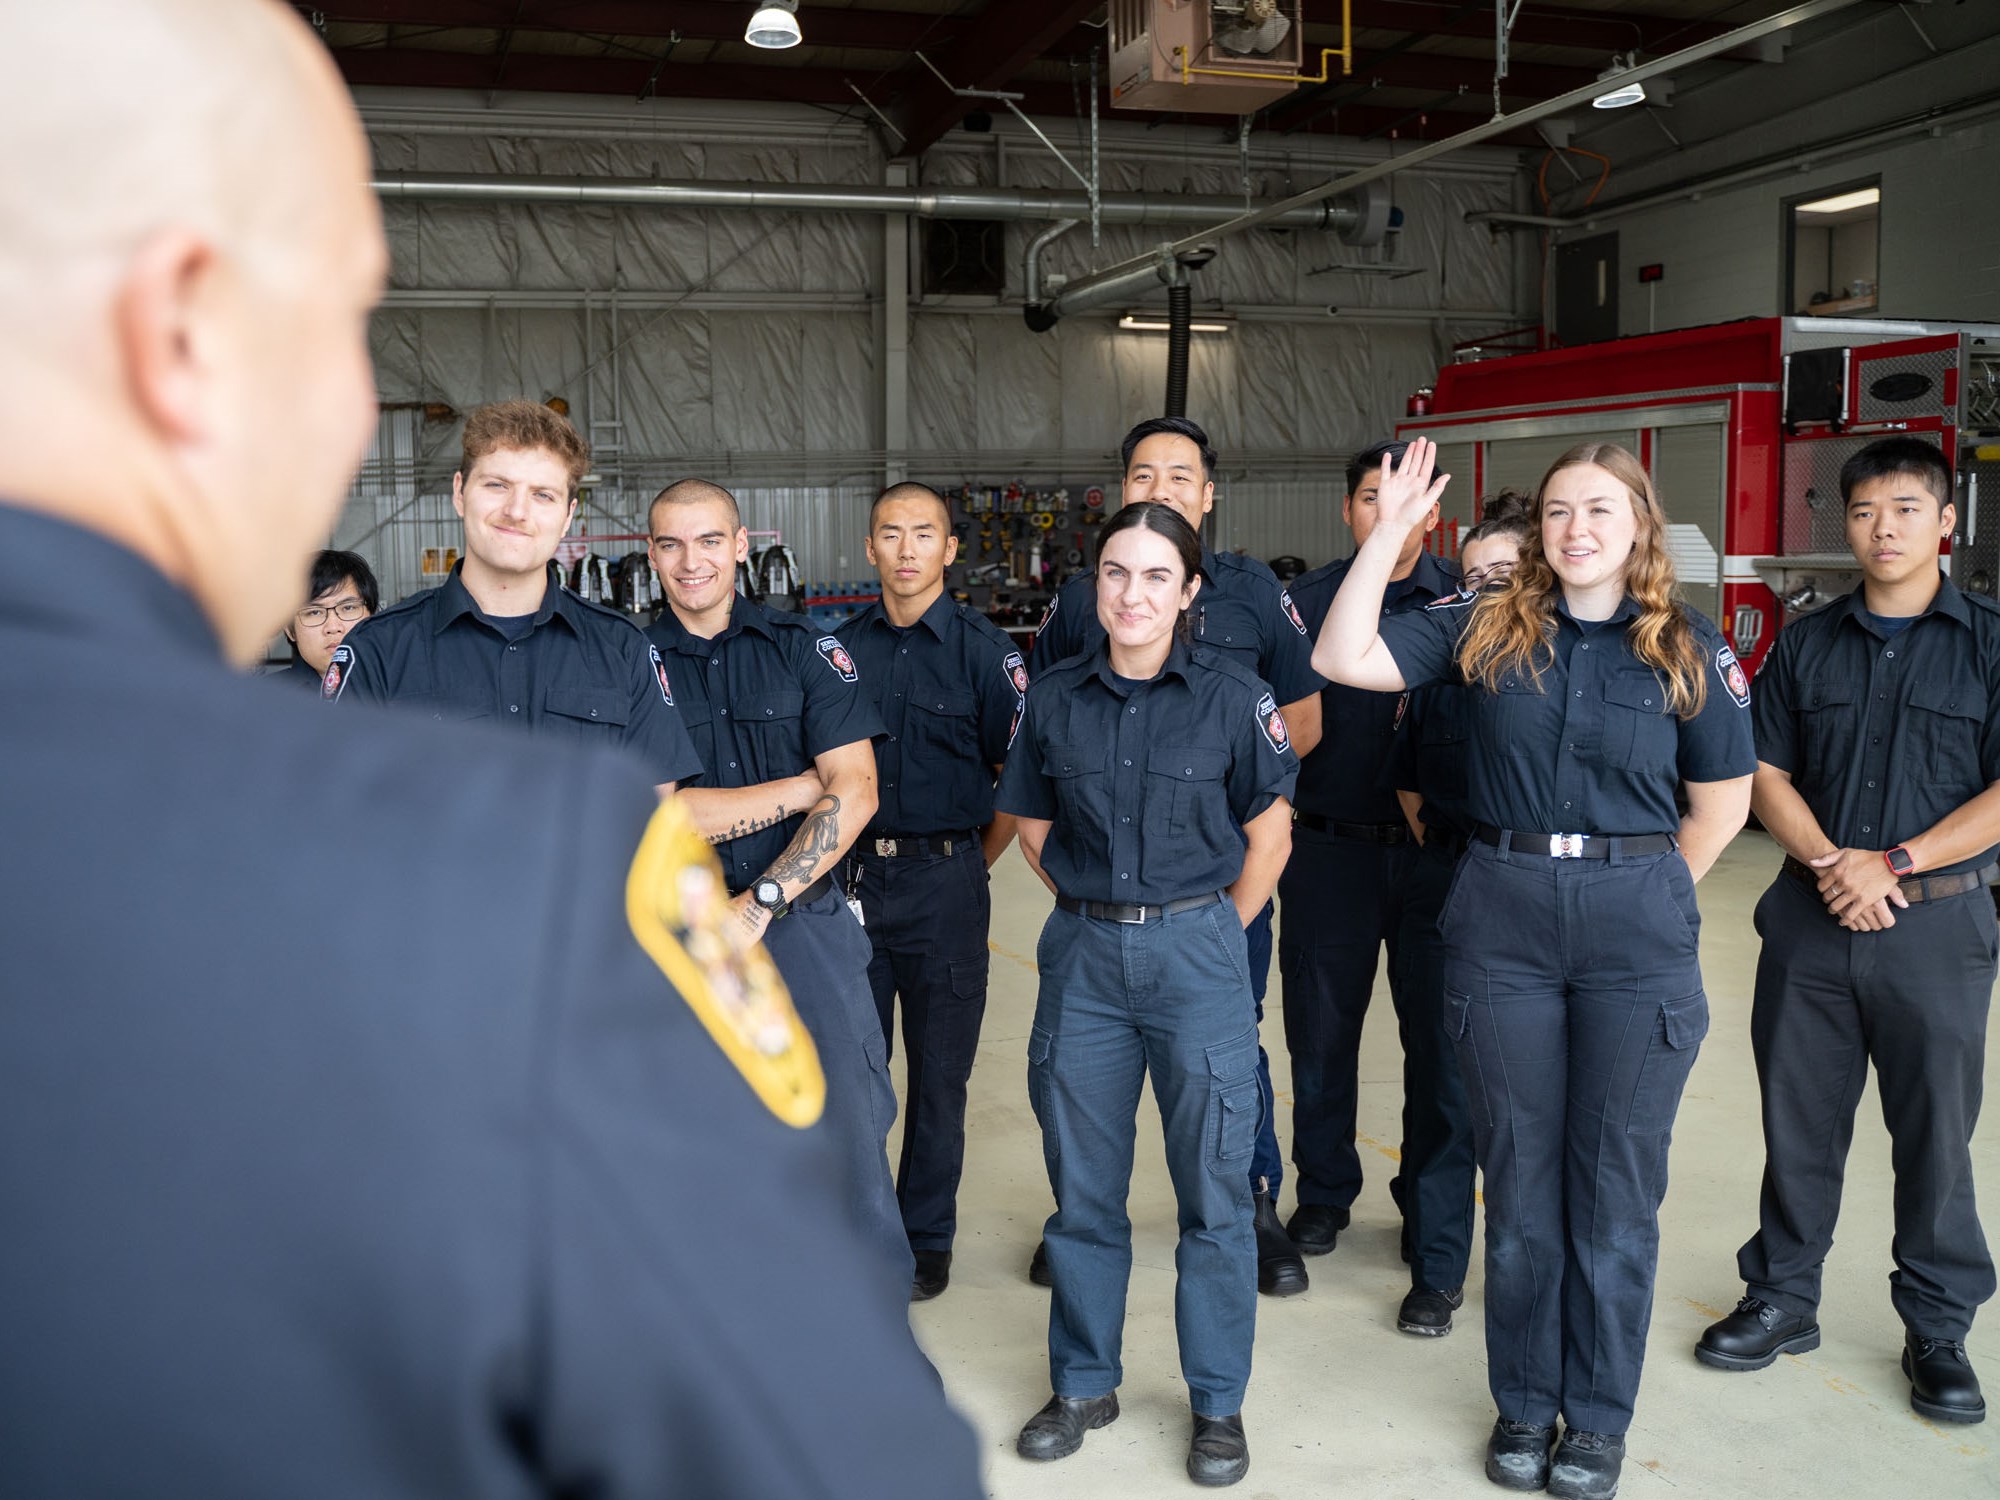 Seneca and Brampton Fire & Emergency Services partner to boost representation among firefighters